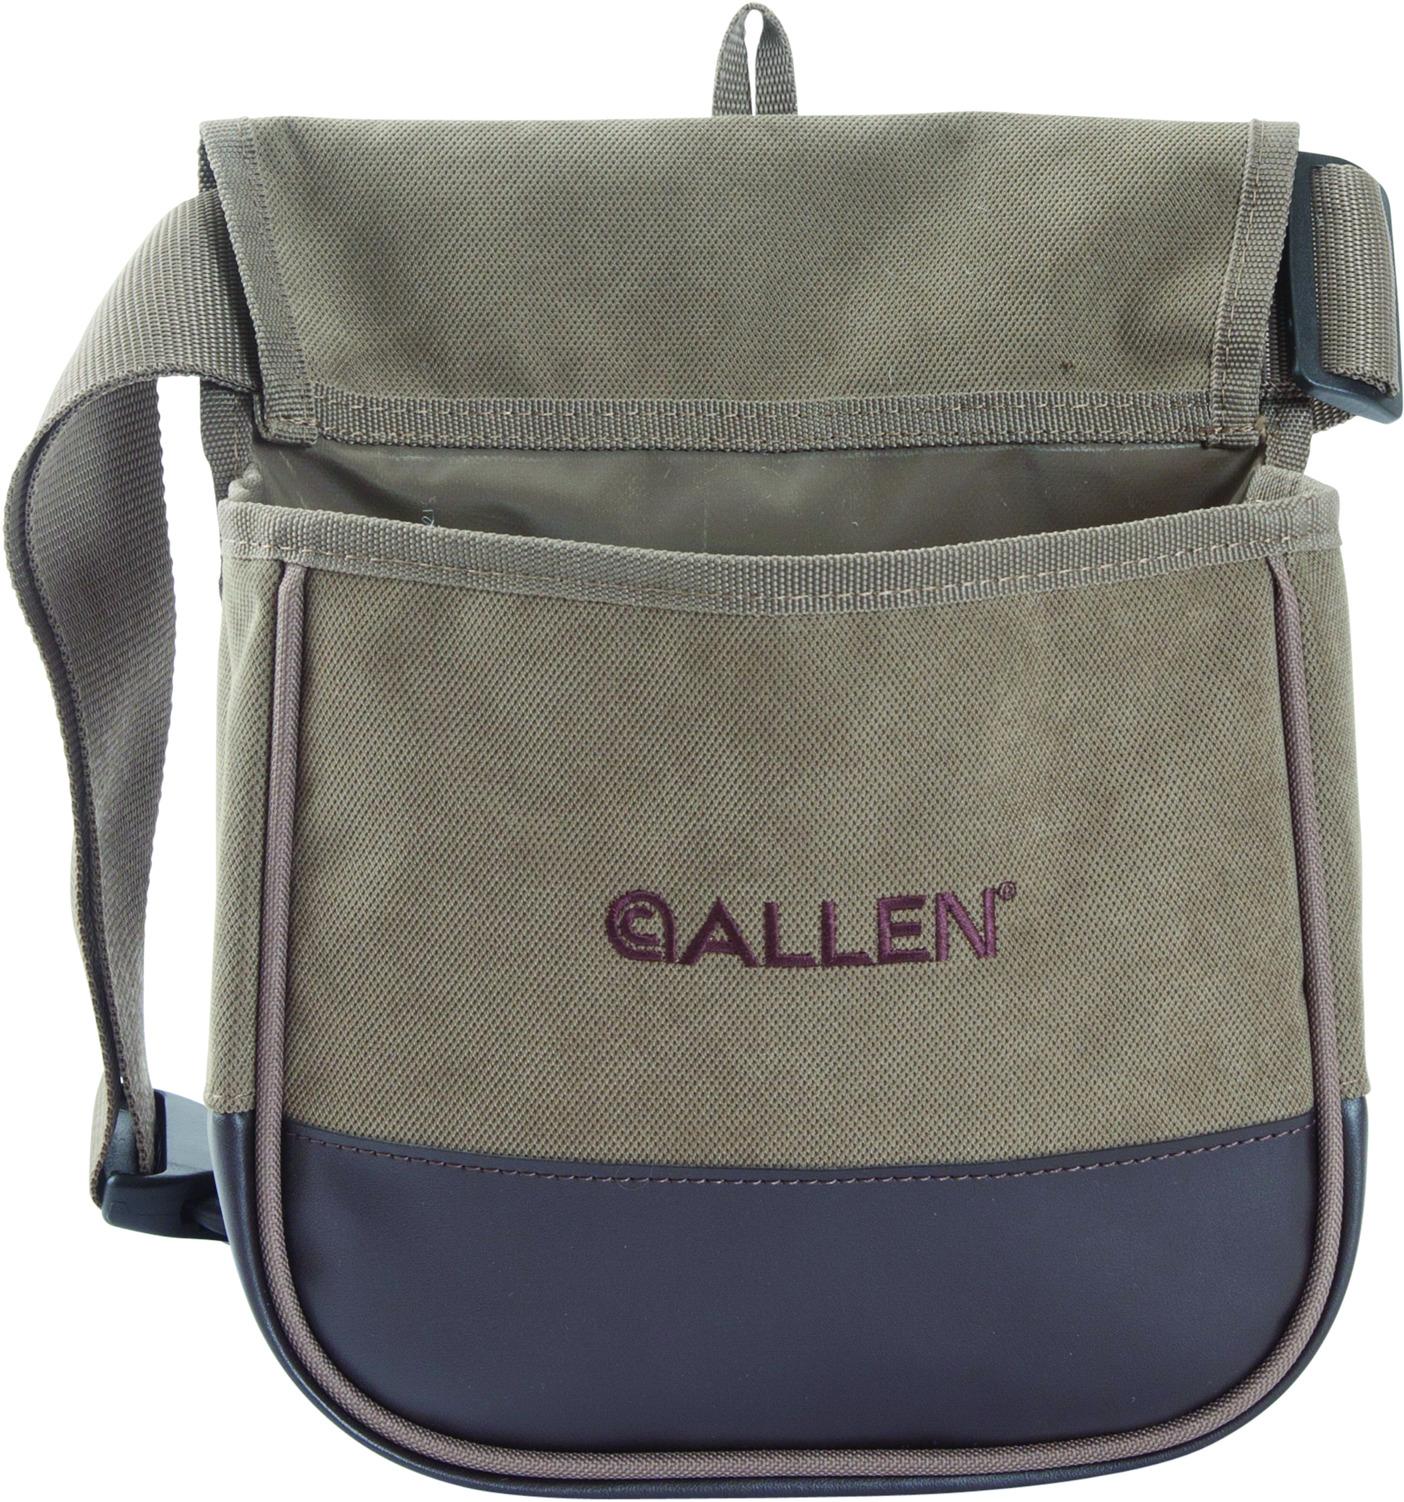 Allen 2306 Select Canvas Double Compartment Shell Bag Olive Green